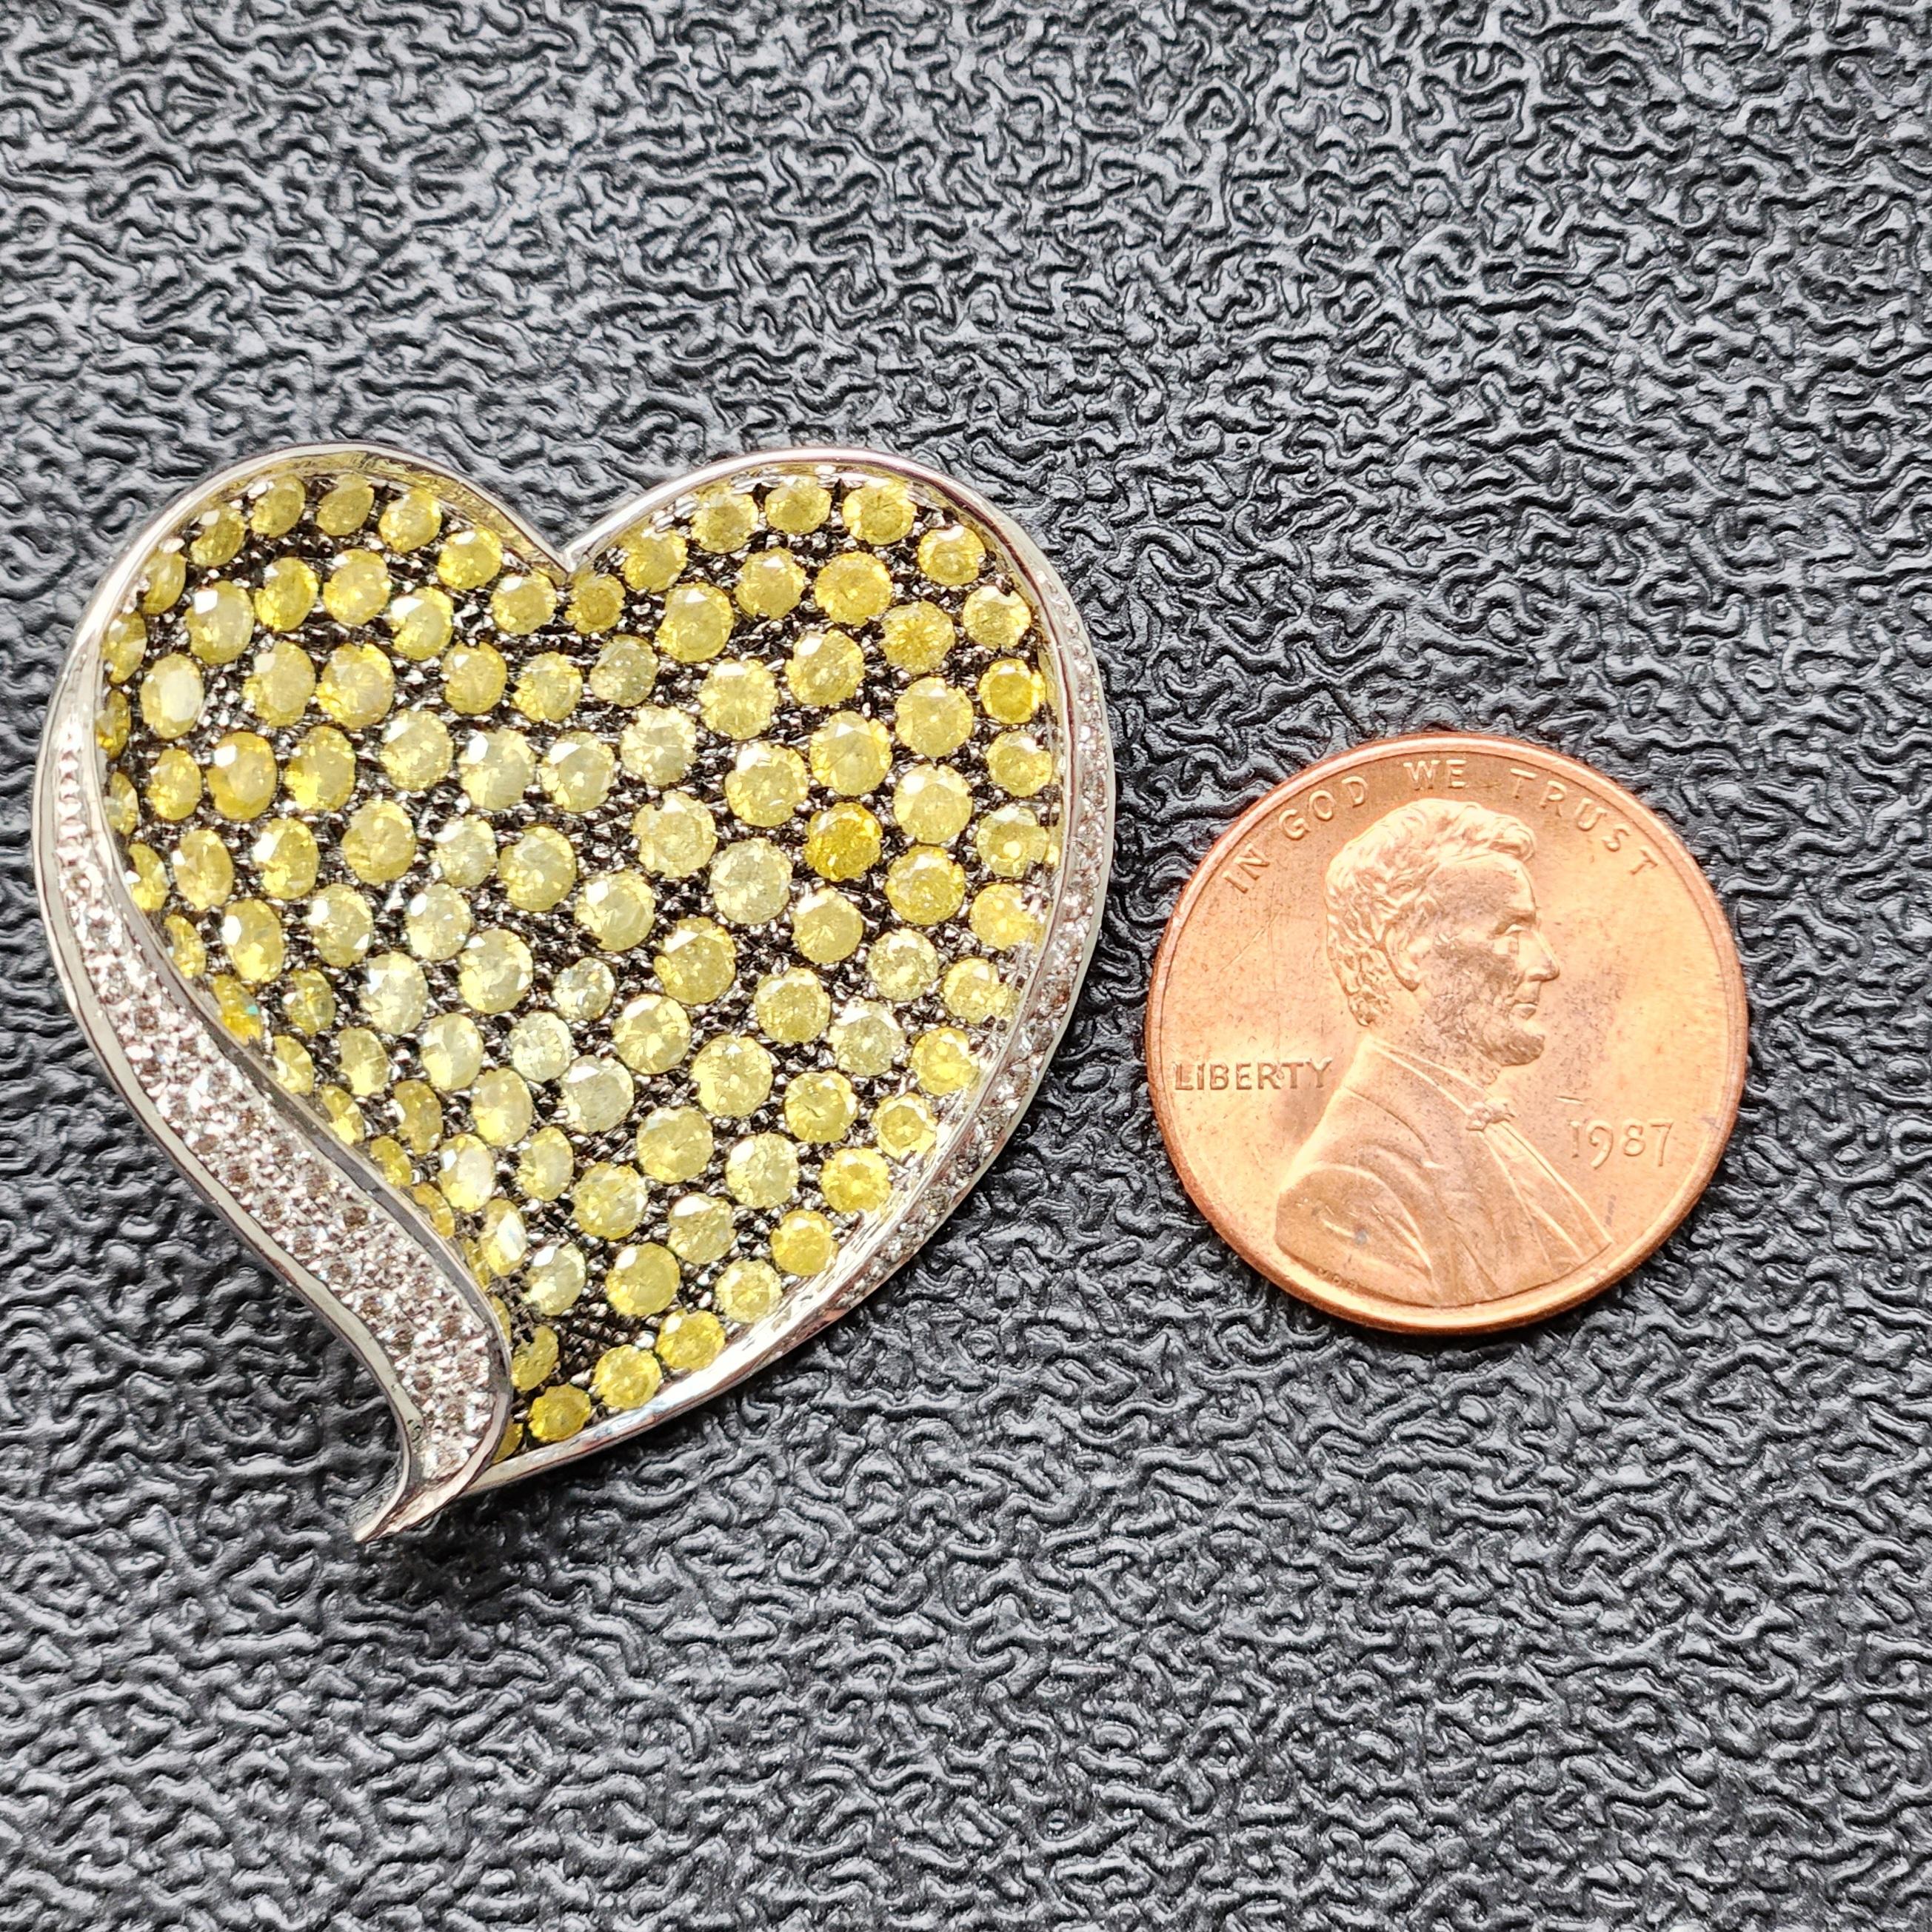 Introducing the Greenish Yellow Heart-shaped Brooch Pendant, a stunning piece of jewelry that's magnificiant. Featuring a glittering natural greenish-yellow melee diamond set in 18k white gold and bordered with white melee diamonds, this brooch is